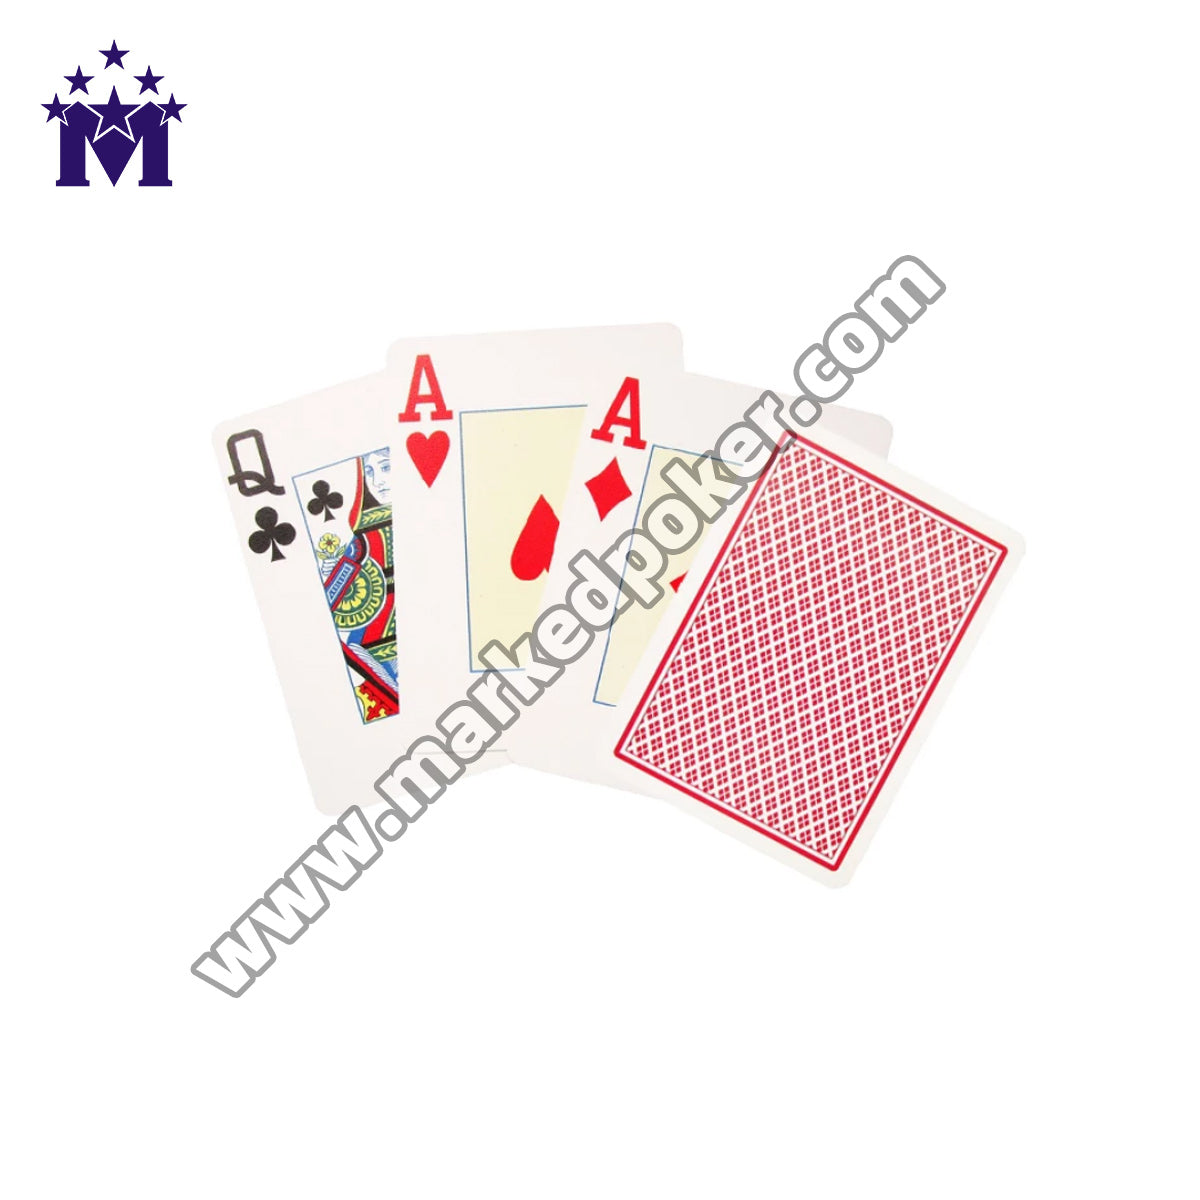 Copag Jumbo Face Playing Cards For Infrared Contact Lenses